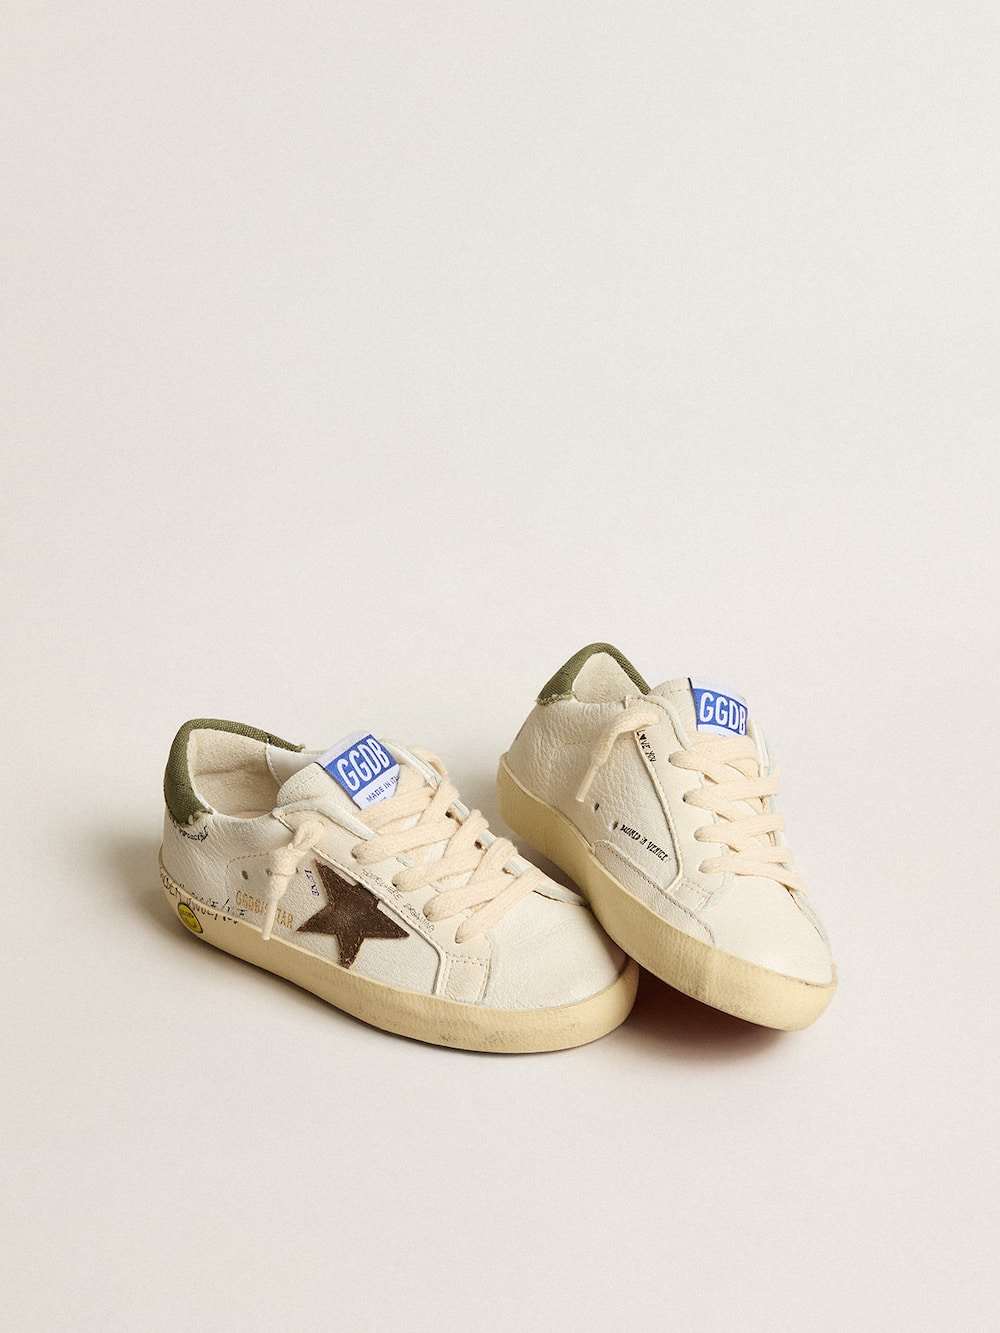 Golden Goose - Super-Star Junior in nappa with suede star and green heel tab in 